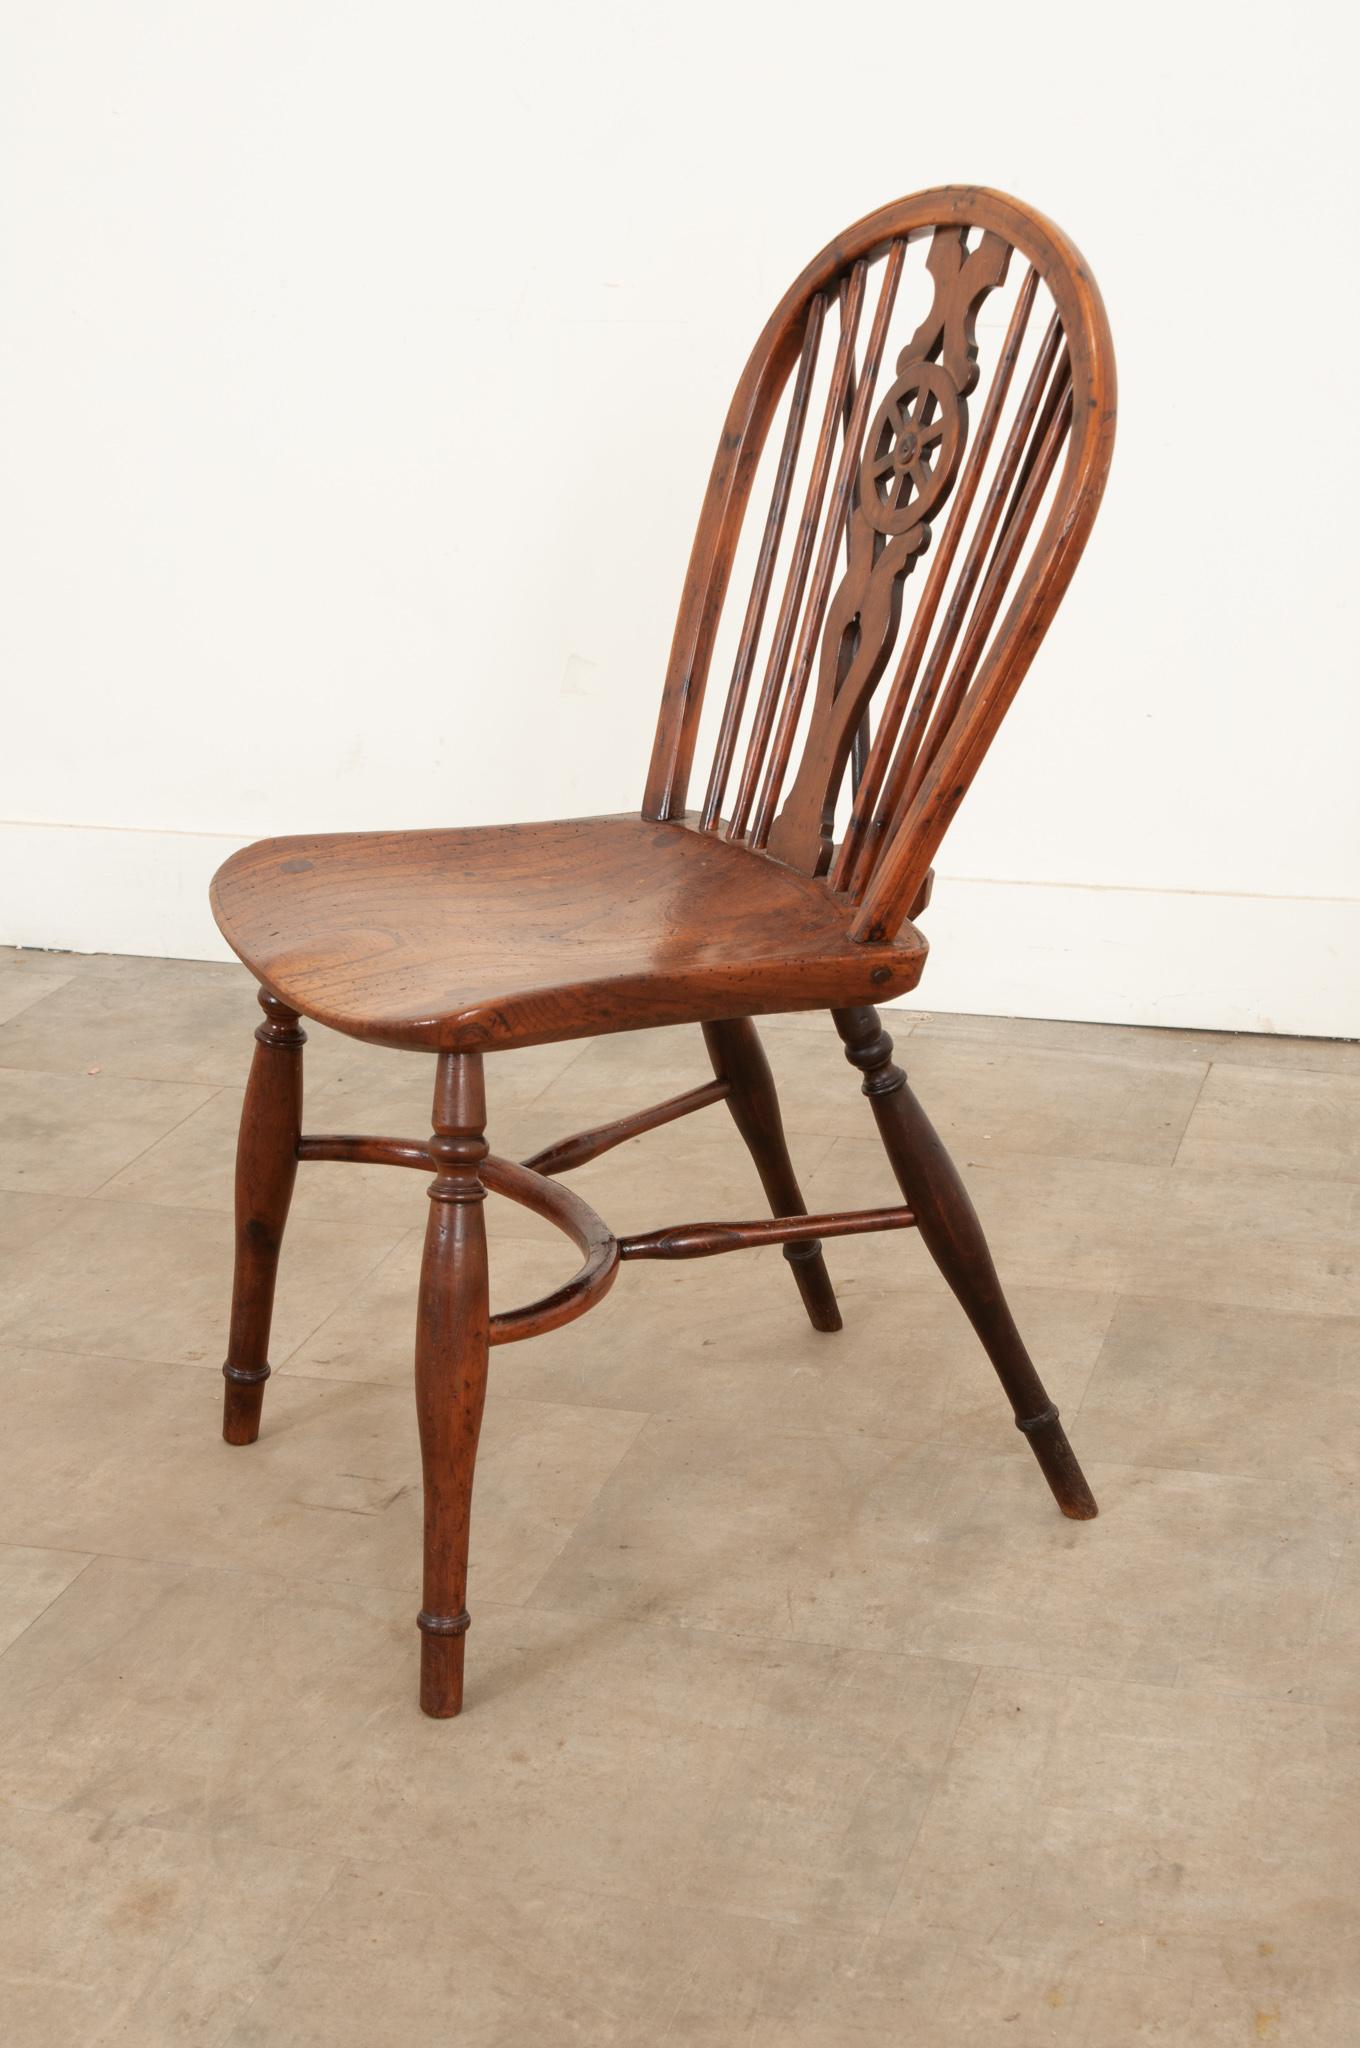 English Early 19th Century Wheelback Windsor Chair For Sale